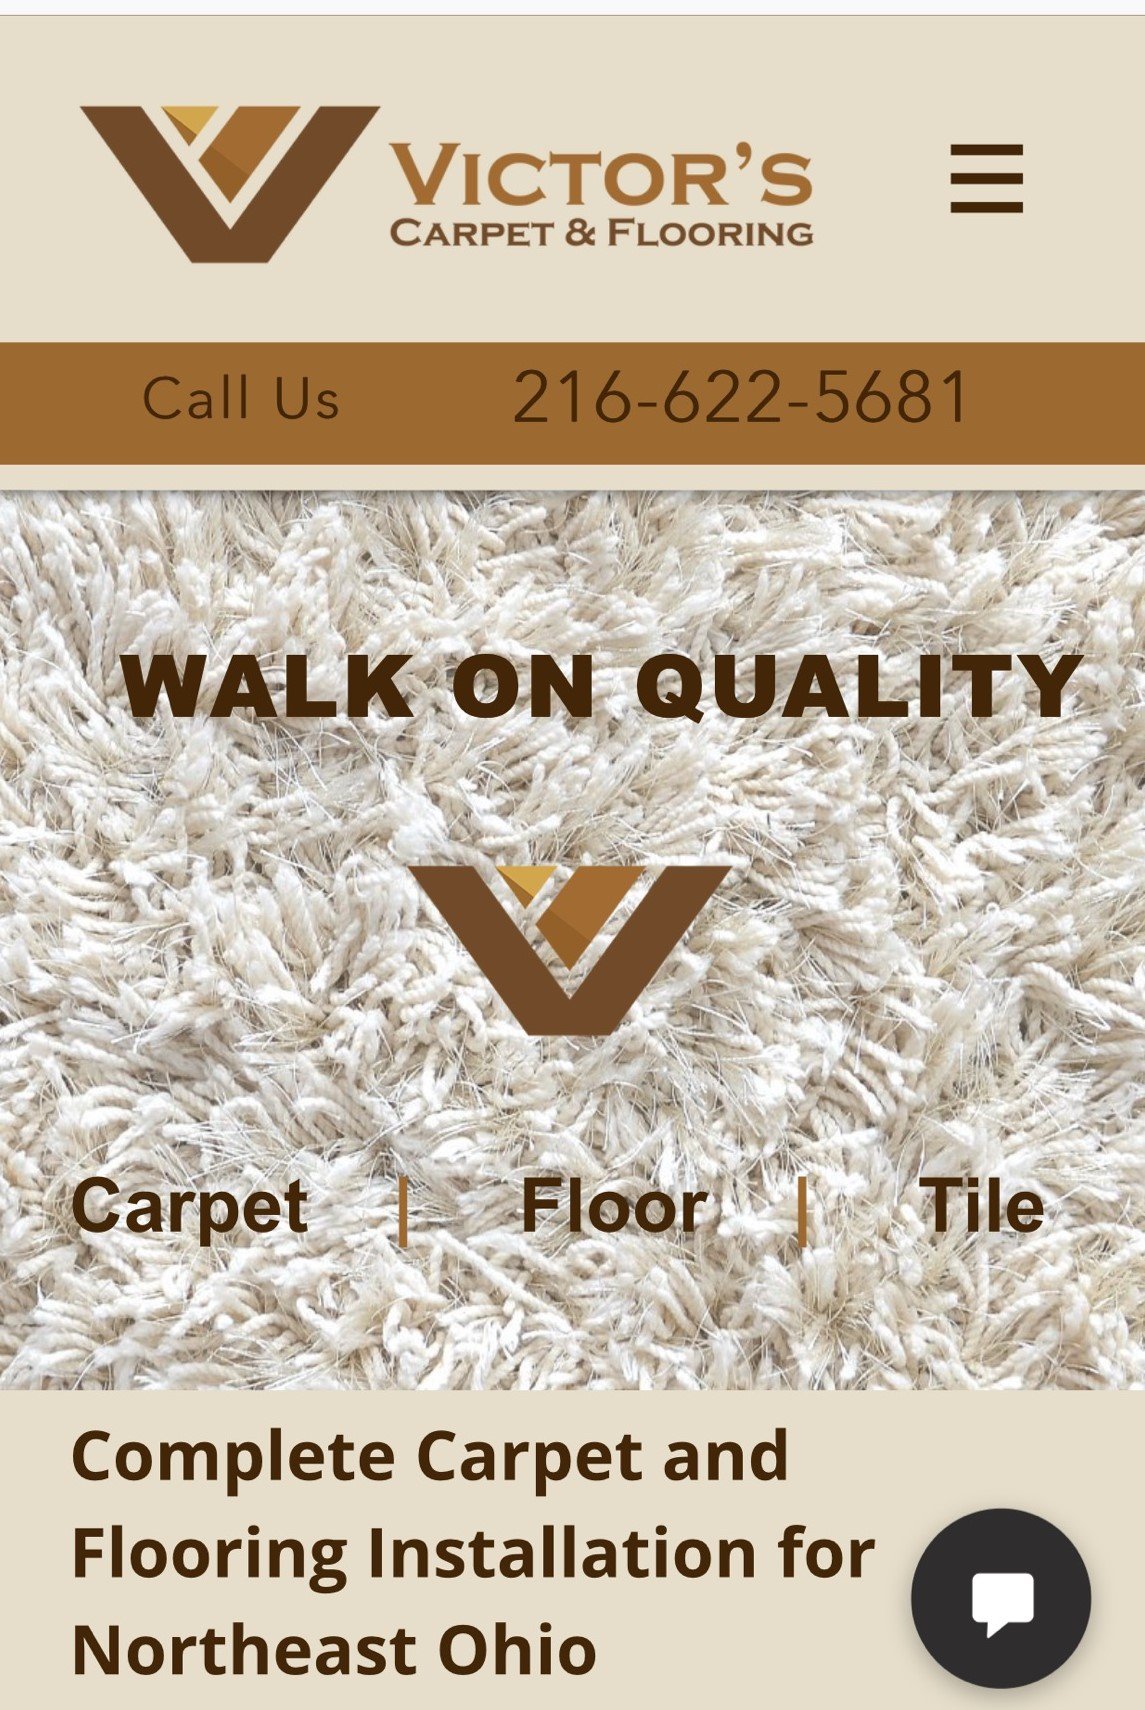 Victor's Carpet and Flooring Logo